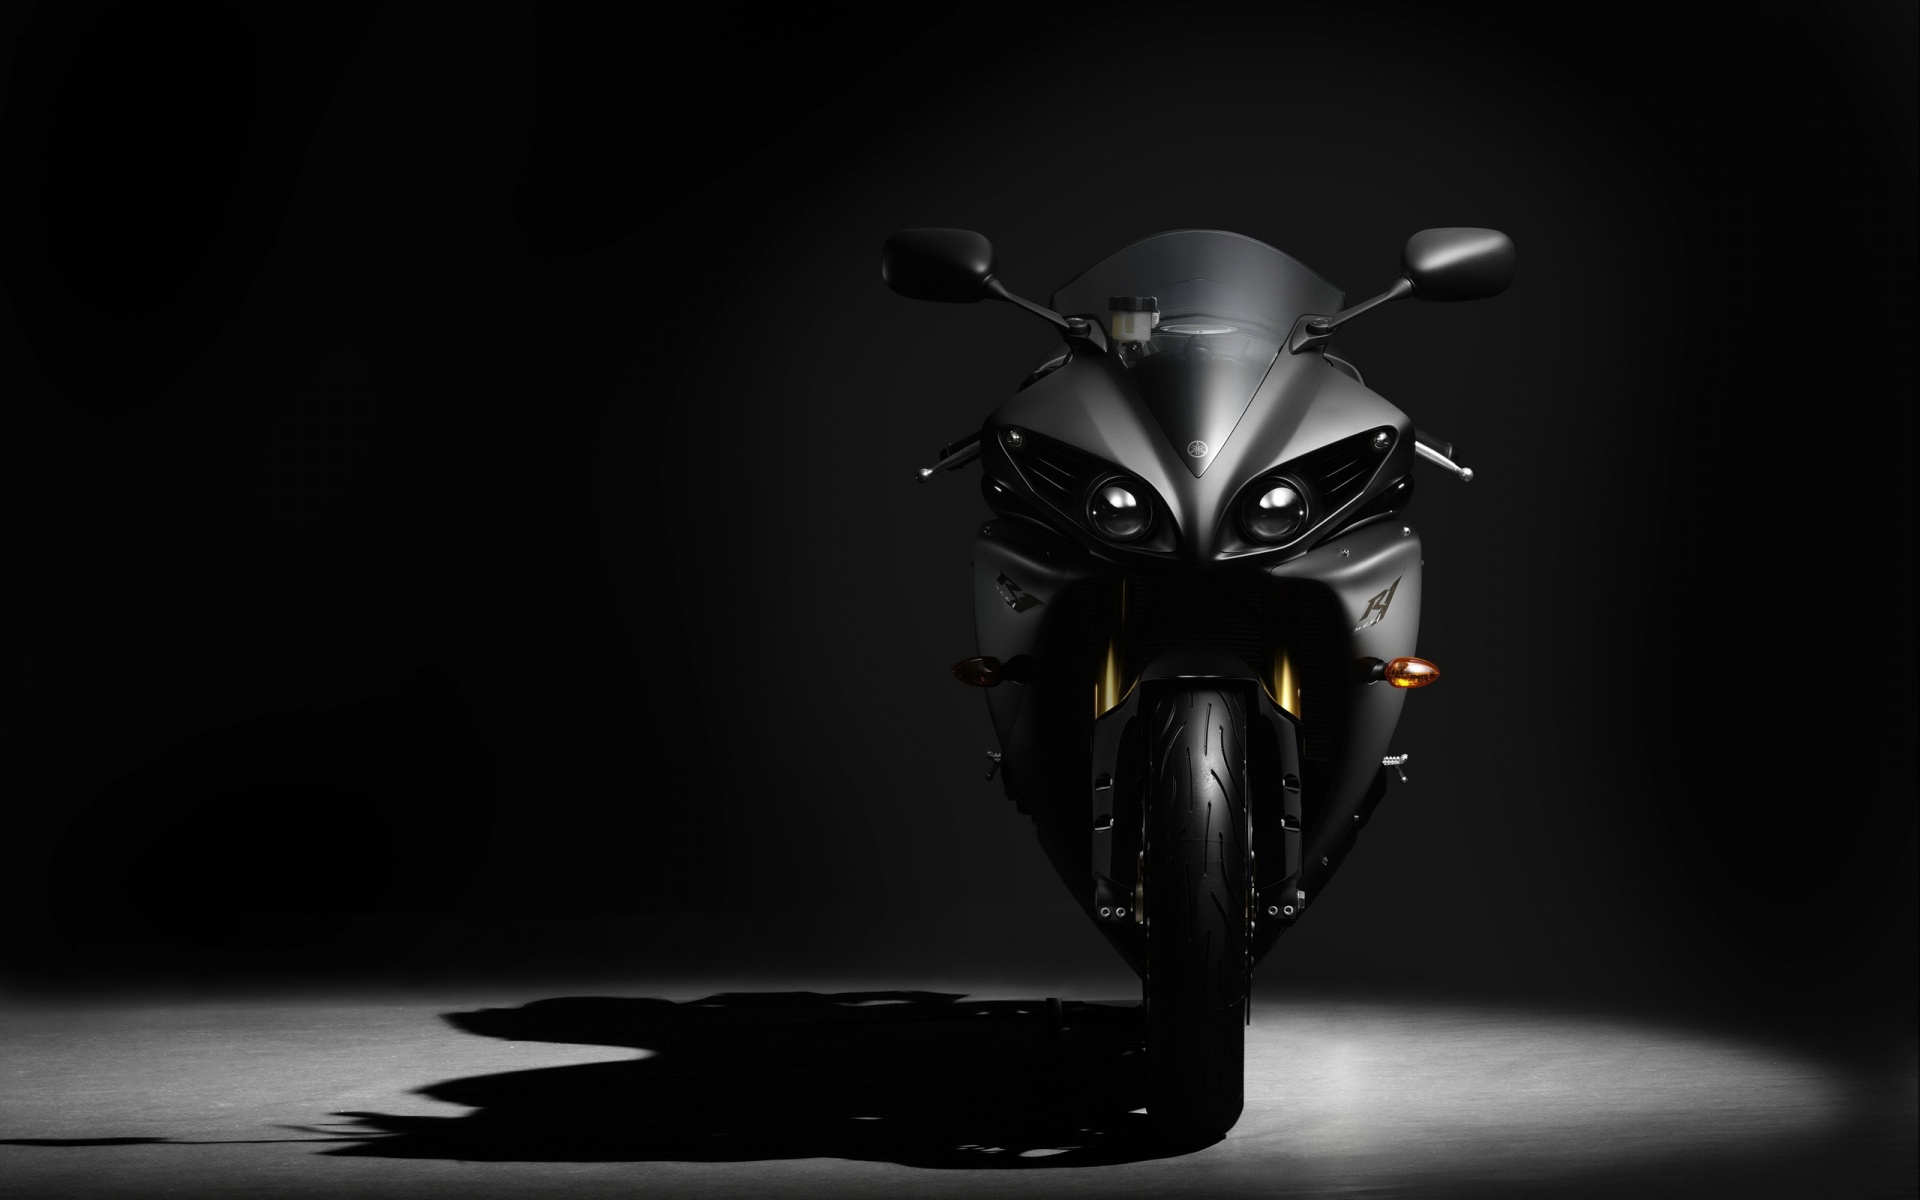 8k Motorcycles Images